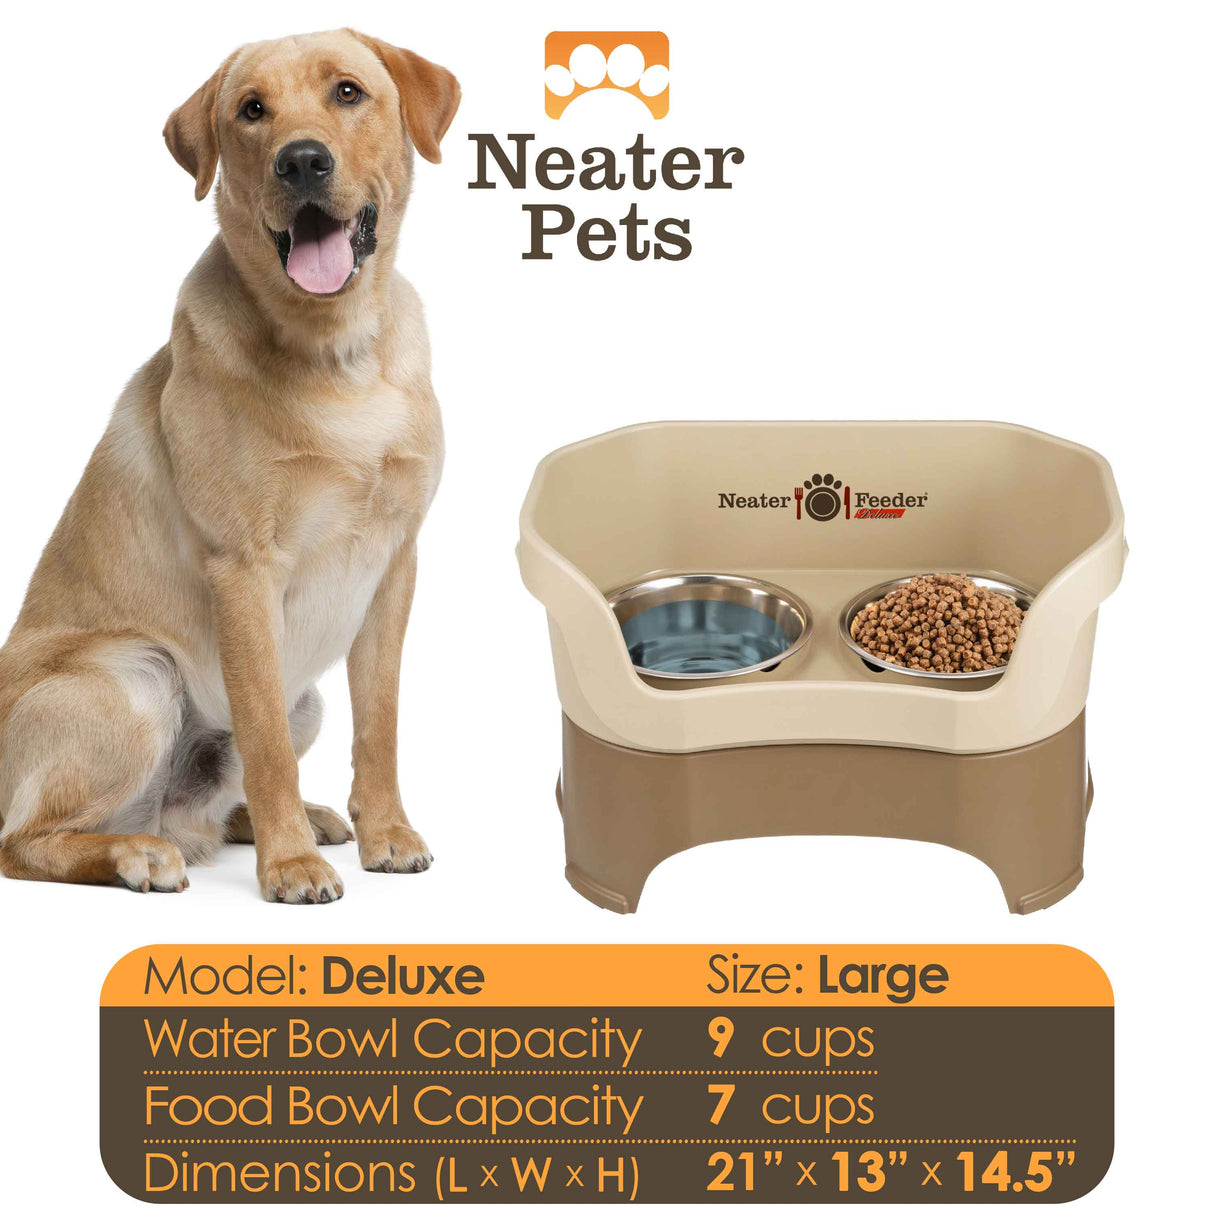 Neater Feeder Deluxe Large Cappuccino bowl capacities